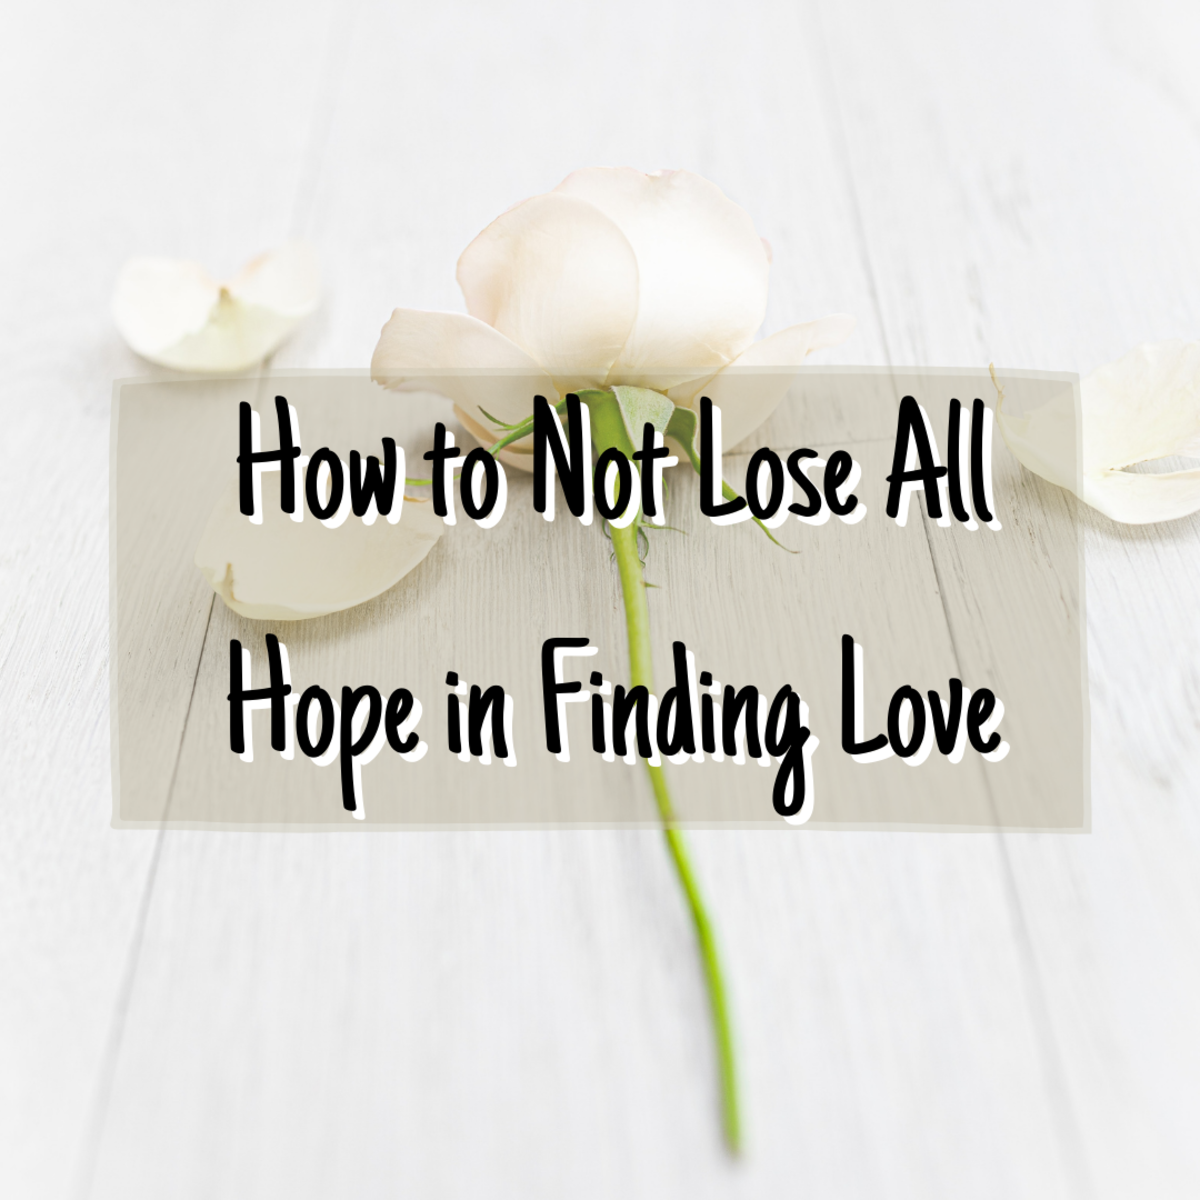 This article explores ways that you can help yourself avoid losing hope in finding love.